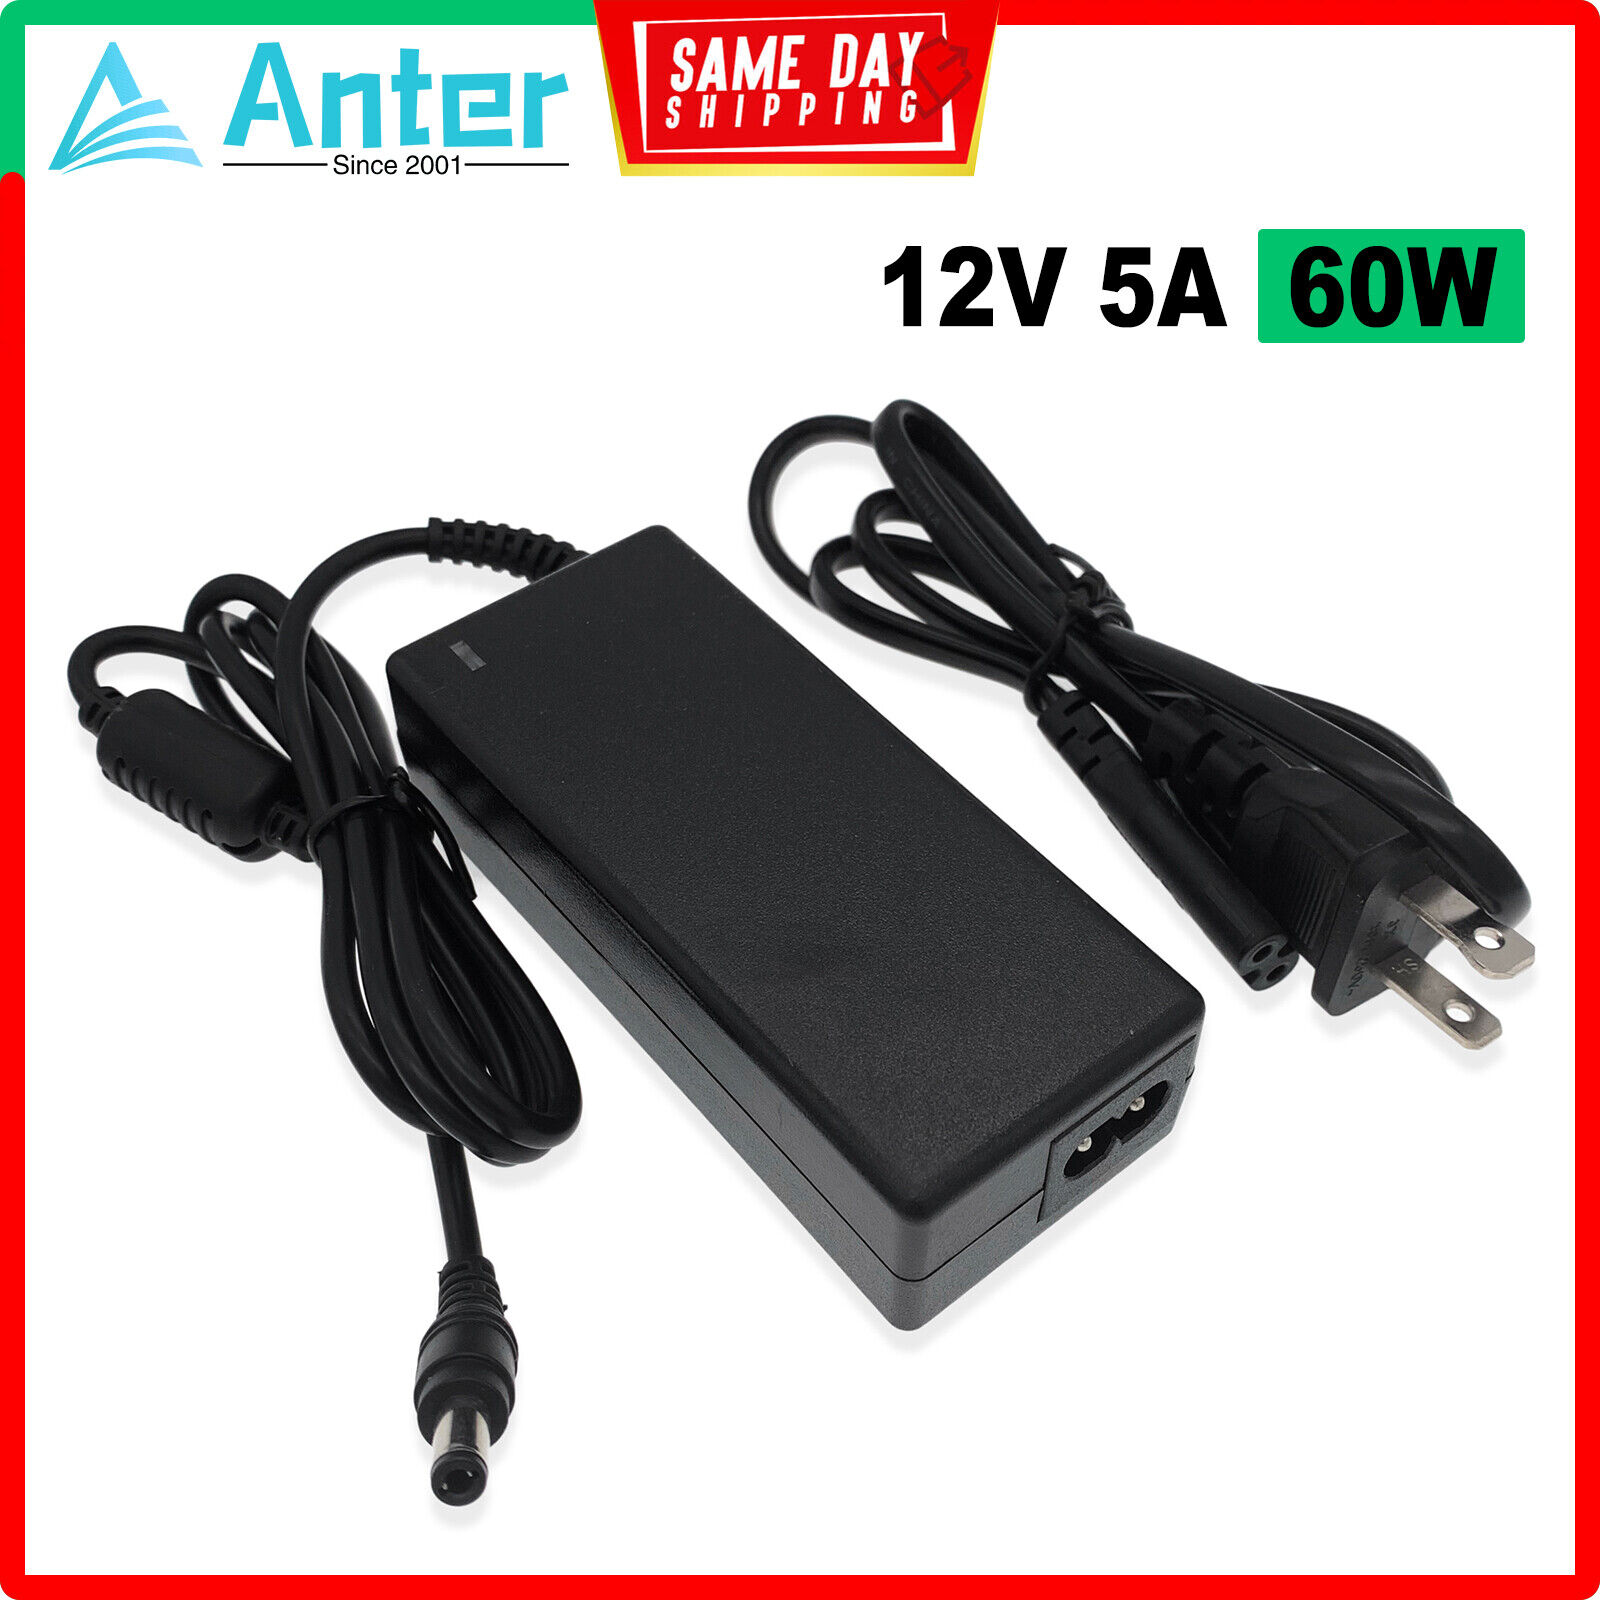 AC Power Adapter Charger For Cen-Tech 62747 5-in-1 Portable Power PACk CenTech